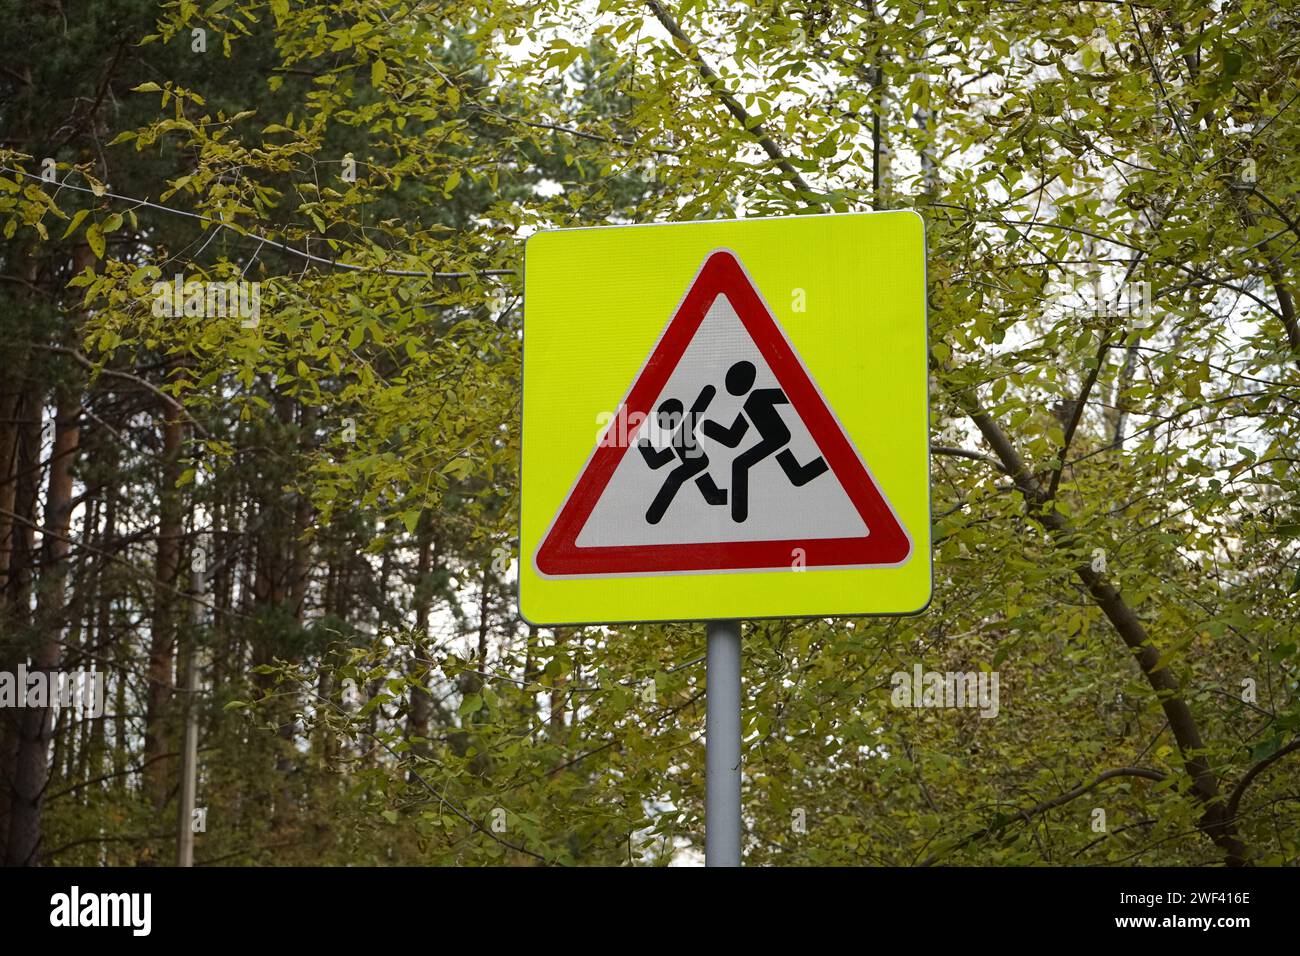 Road sign Denoting Be careful, children, on pole, that is installed near schools. Yellow square, red triangle, white, with the image of running people. Safety, Traffic warning, autumn forest. Stock Photo